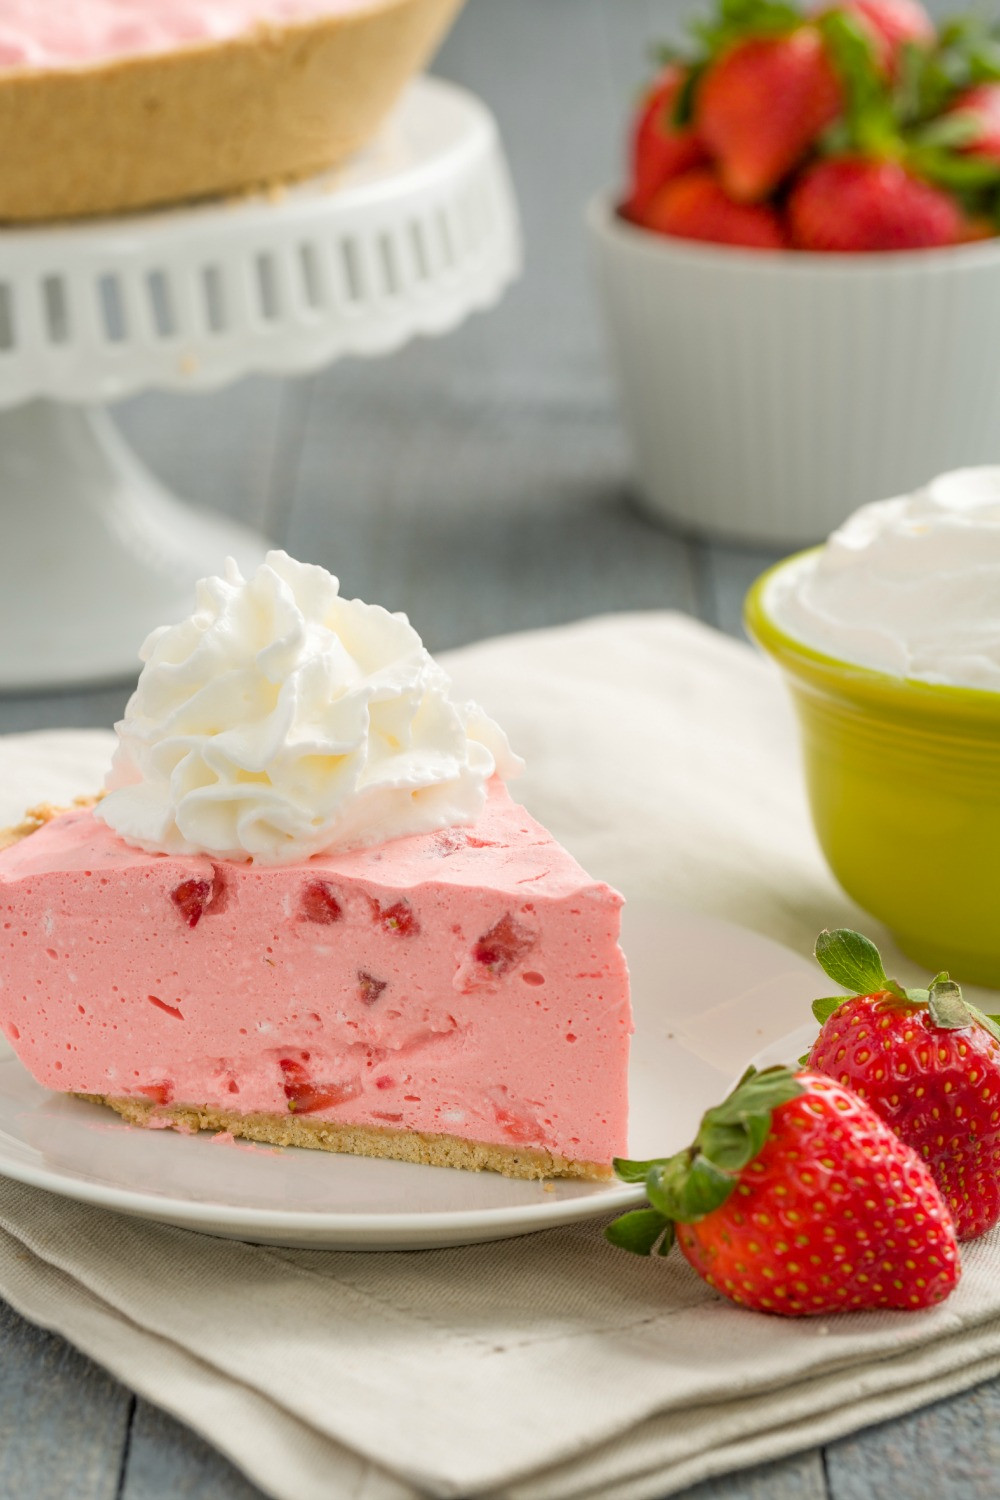 Easy Strawberry Desserts Cool Whip
 Best Cool Whip Pies Easy Recipes for No Bake Cool Whip